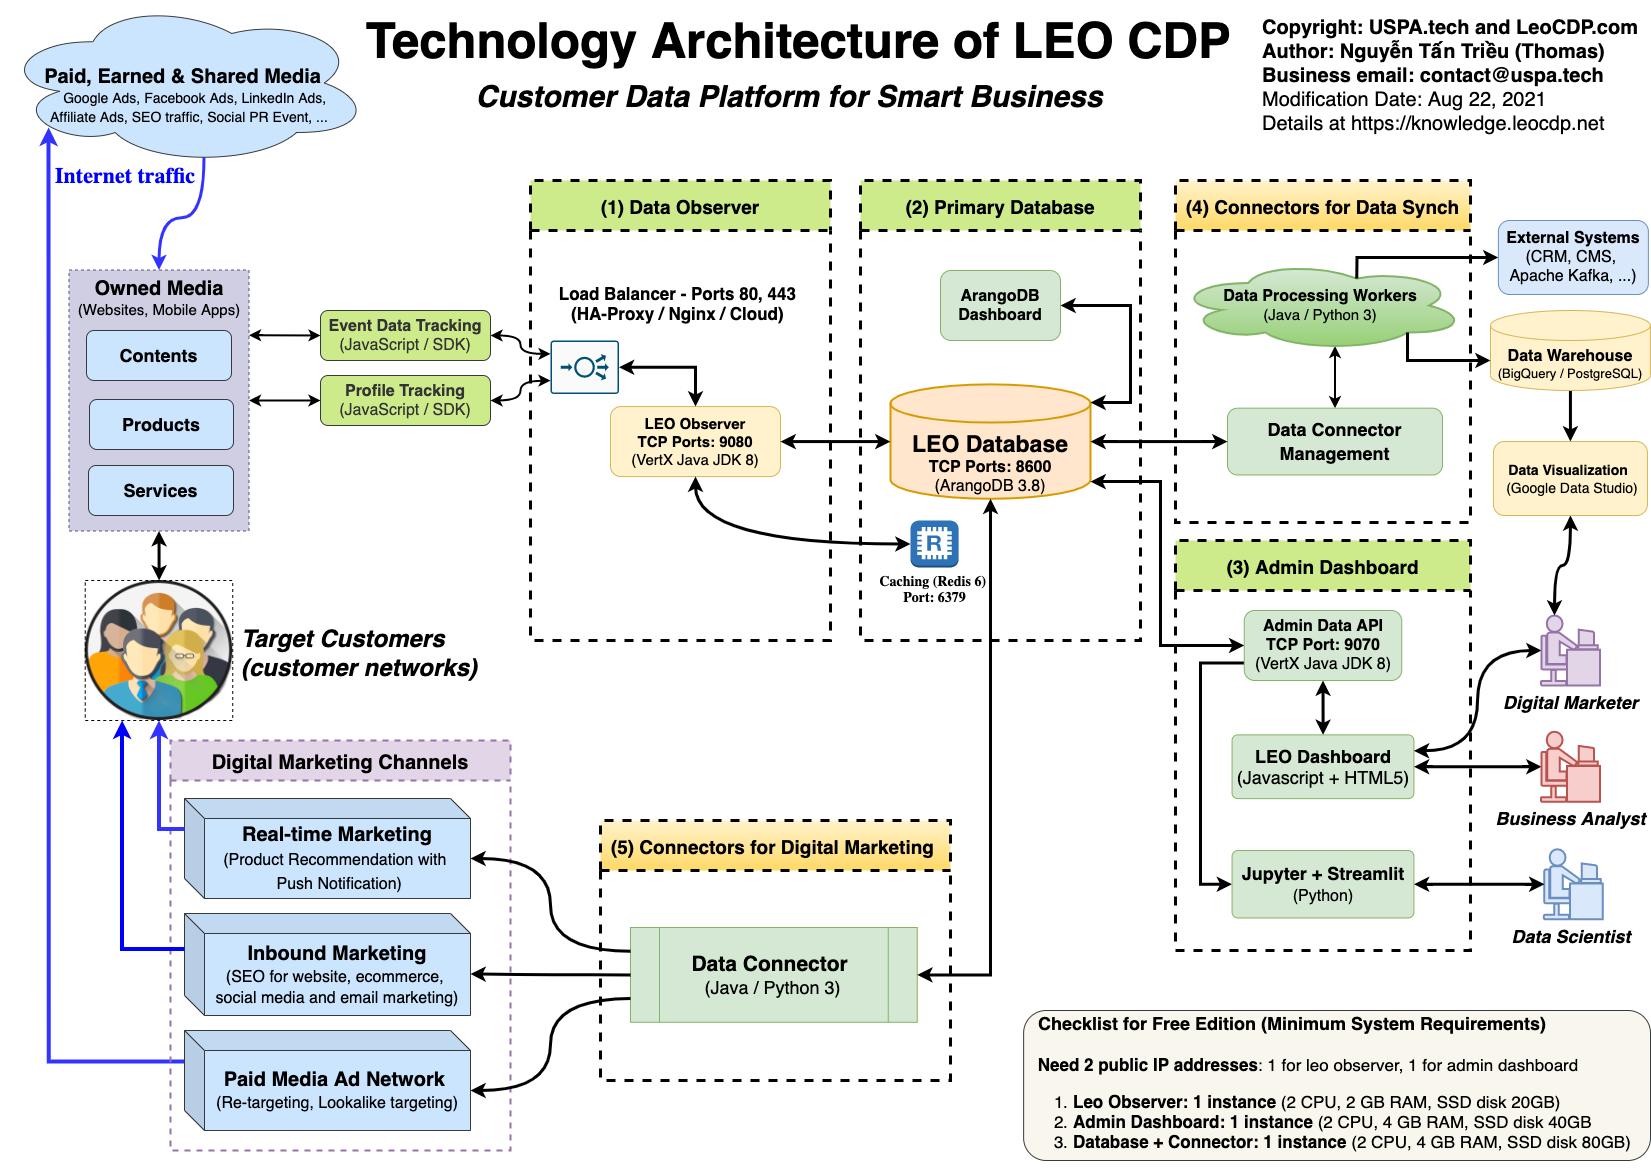 technology-architecture-leo-cdp-version-1.0-aug.22.2021.png